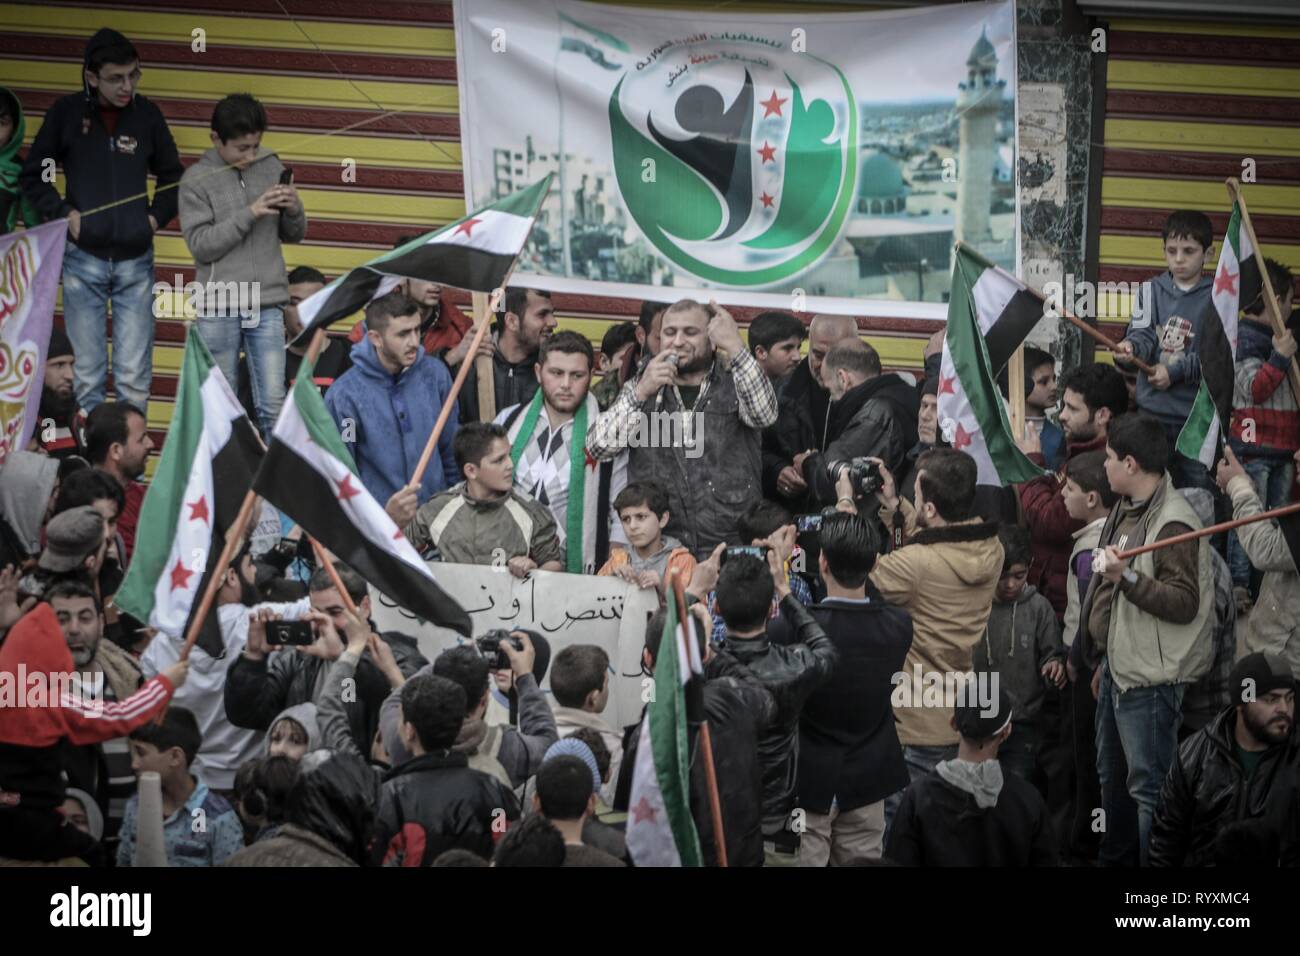 Benesh, Idleb, Syria. 15th Mar, 2019. Syrians are seen holding opposition flags during the celebration.Syrians in the town of Bensh, which lies east of Idlib and controlled by the opposition, celebrated the eighth anniversary of the uprising against the rule of President Bashar al-Assad. Credit: Mohamad Saeed/SOPA Images/ZUMA Wire/Alamy Live News Stock Photo